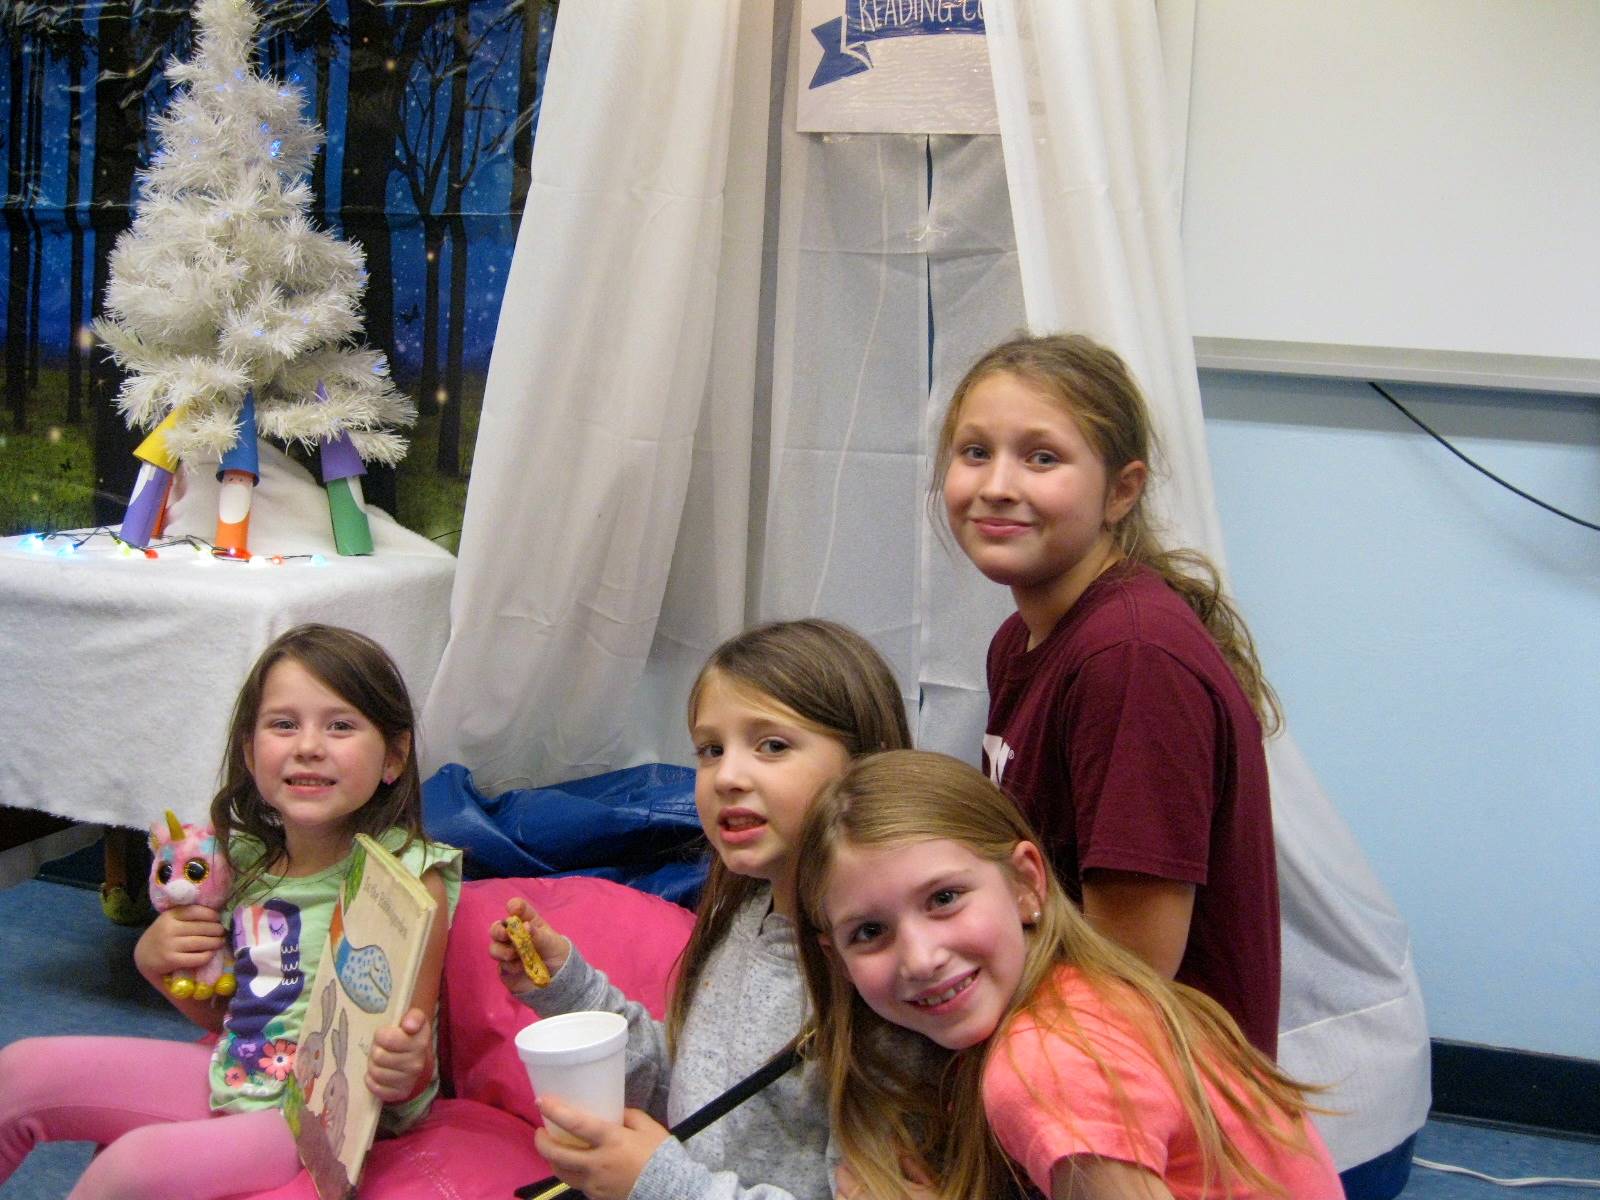 Children in the Open house "book nook"